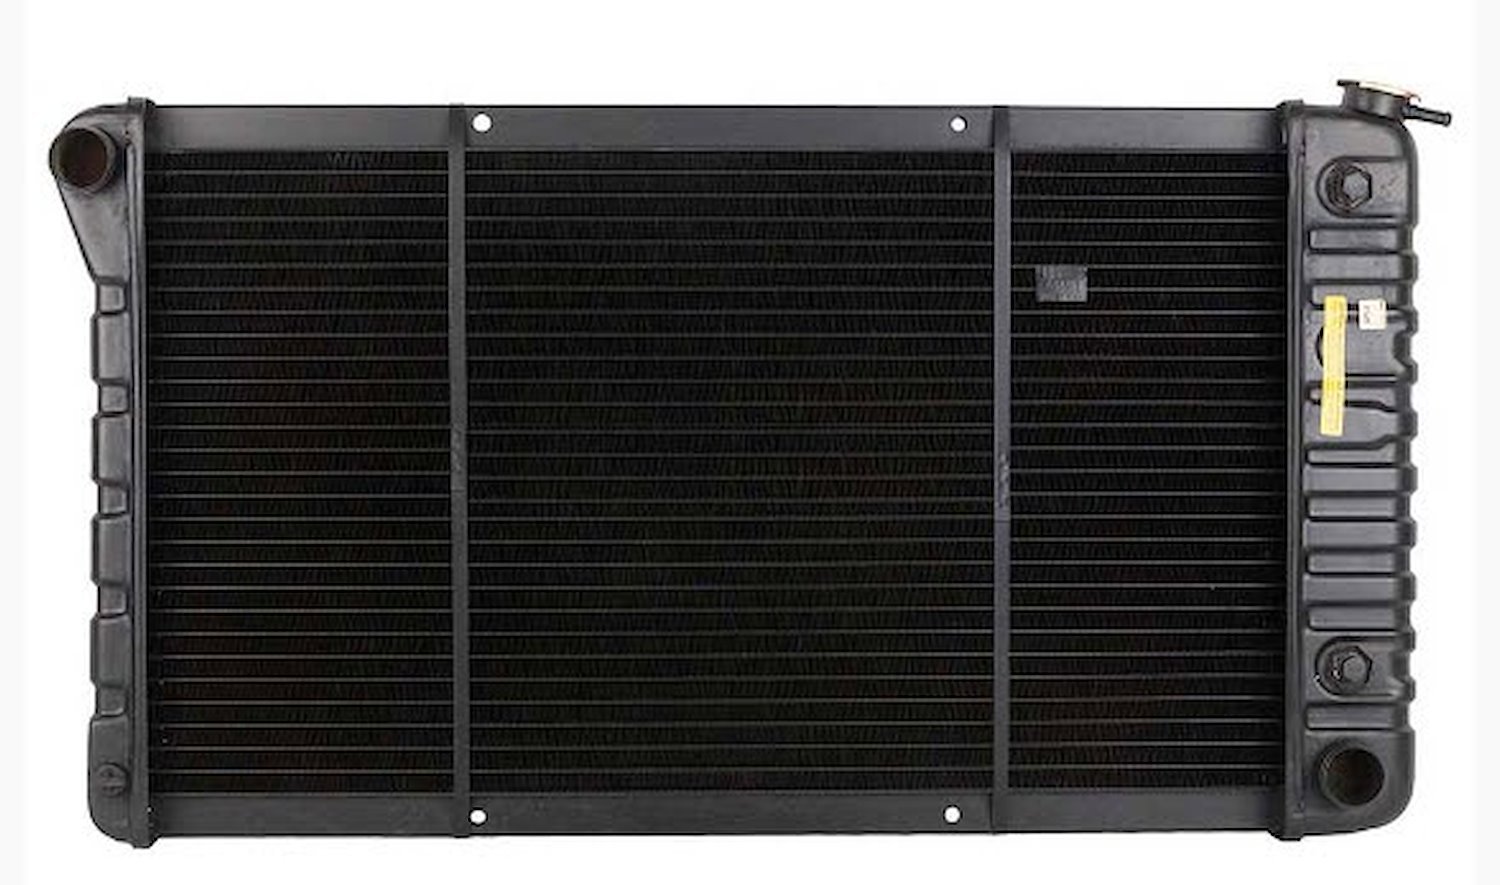 Replacement Radiator Fits Select 1968-1972 Chevrolet & Oldsmobile Models [3-Row]